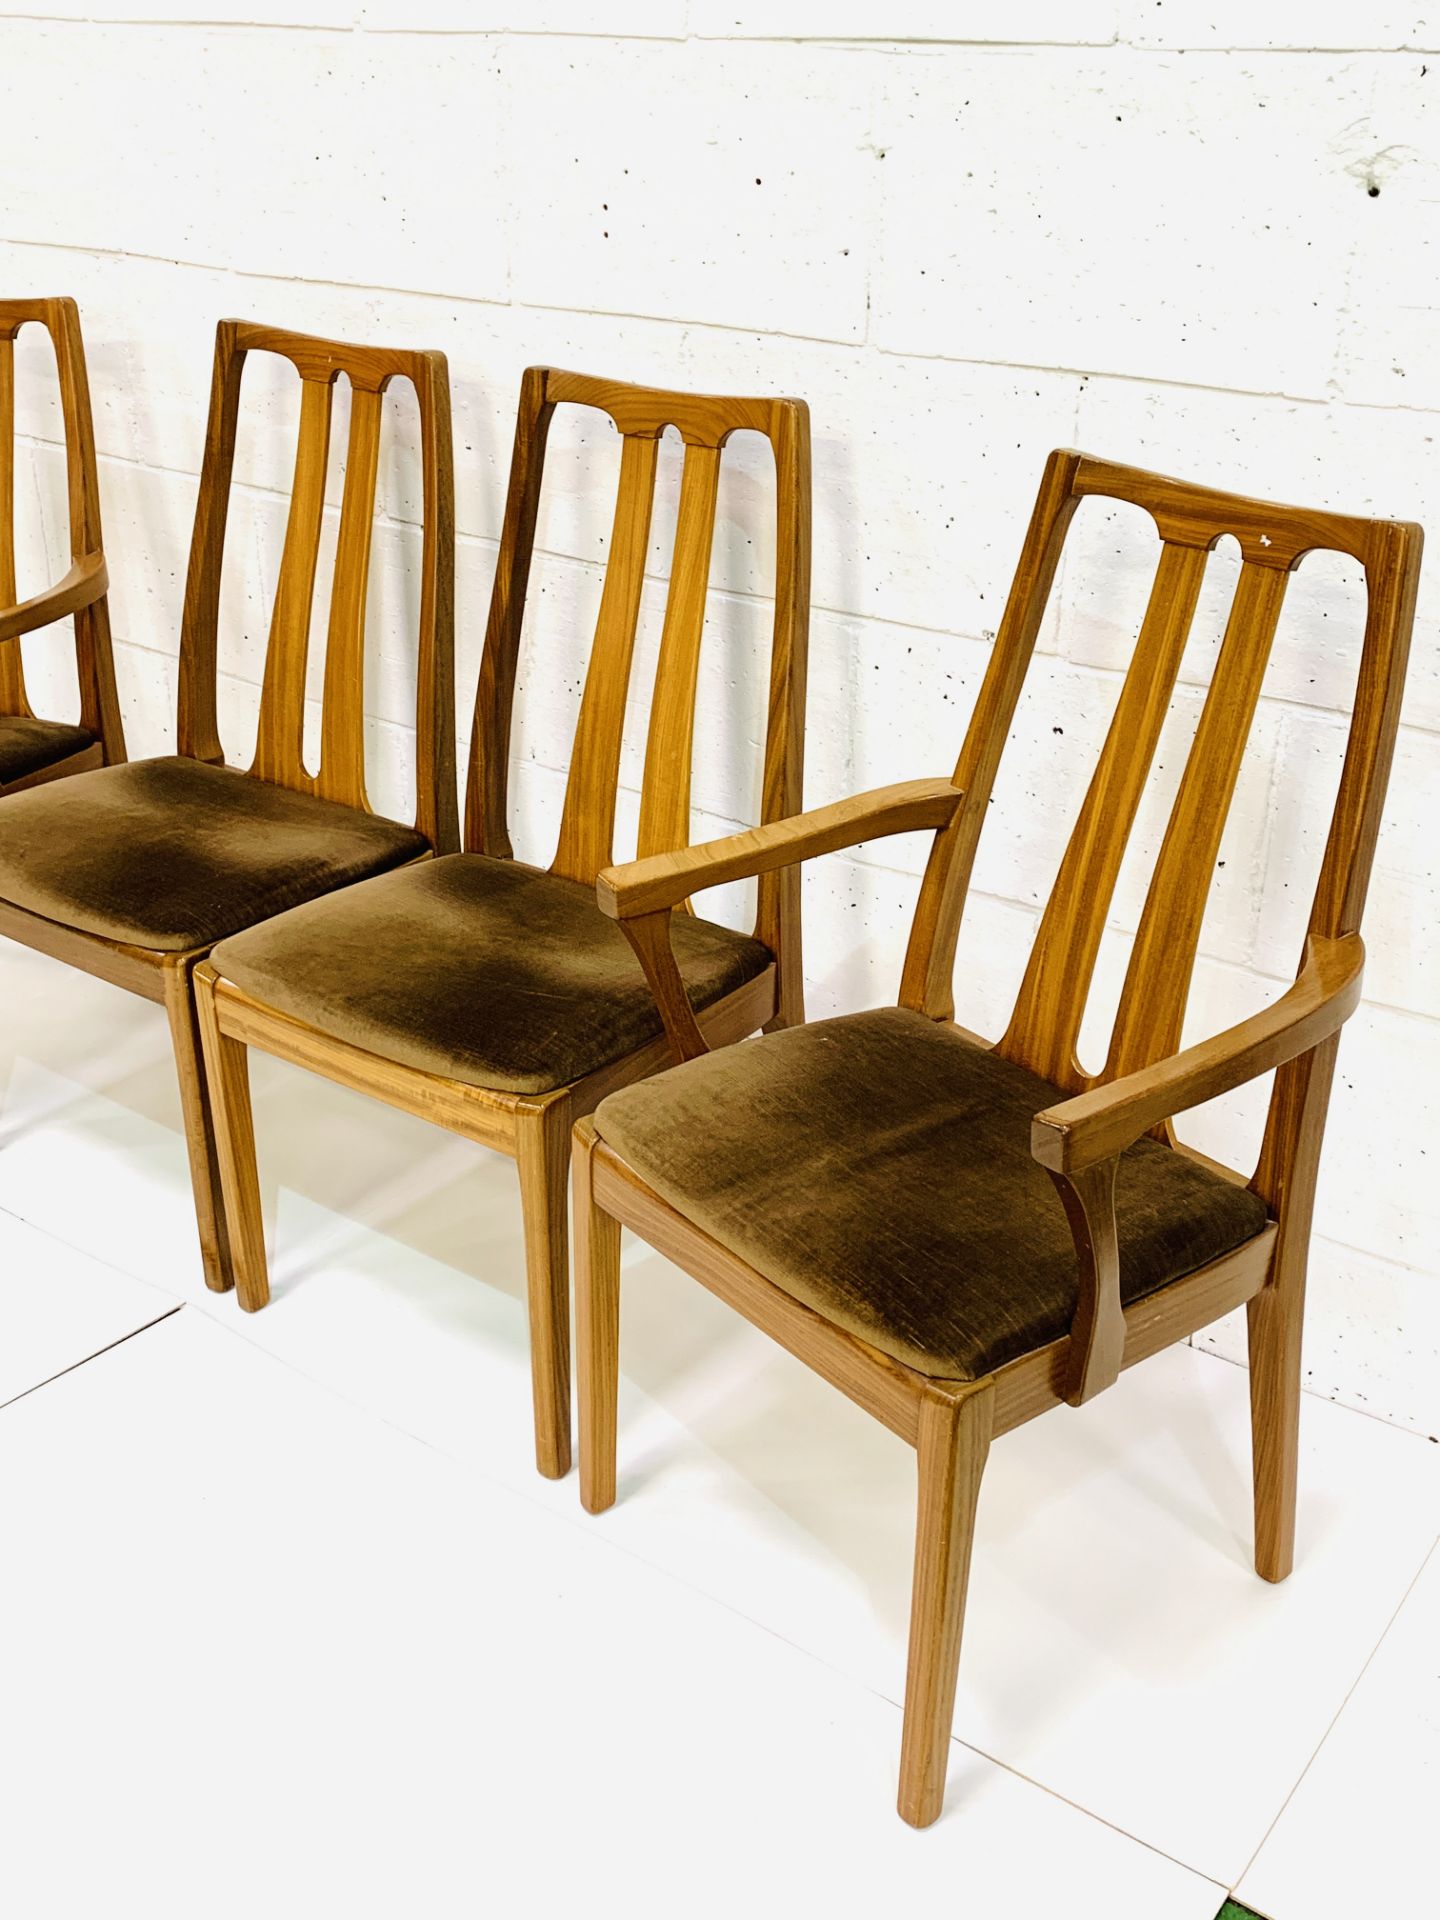 Group of four Nathan Furniture chairs - Image 2 of 6